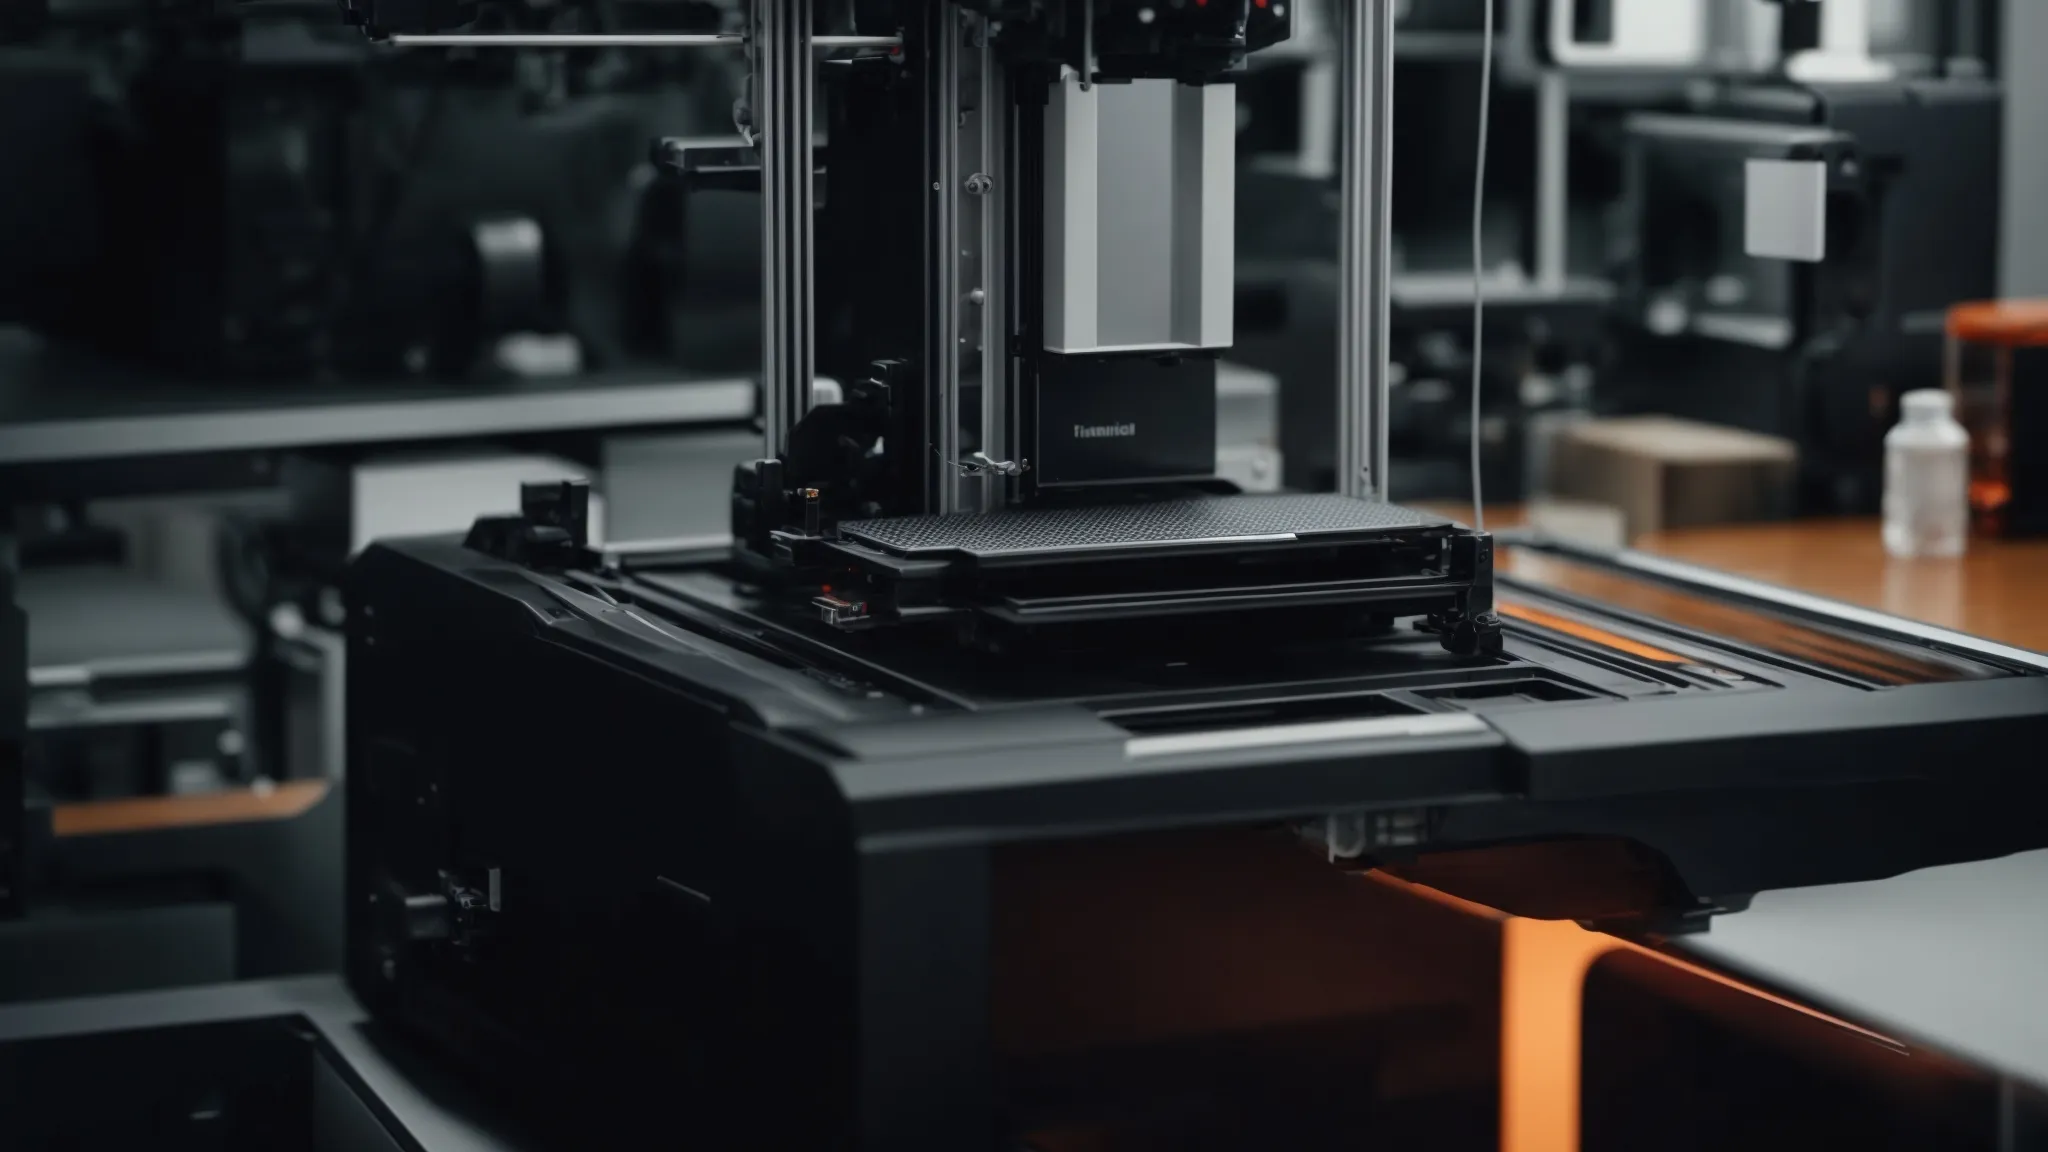 a 3d printer in action, creating a complex object, while a camera records the process for a marketing video.